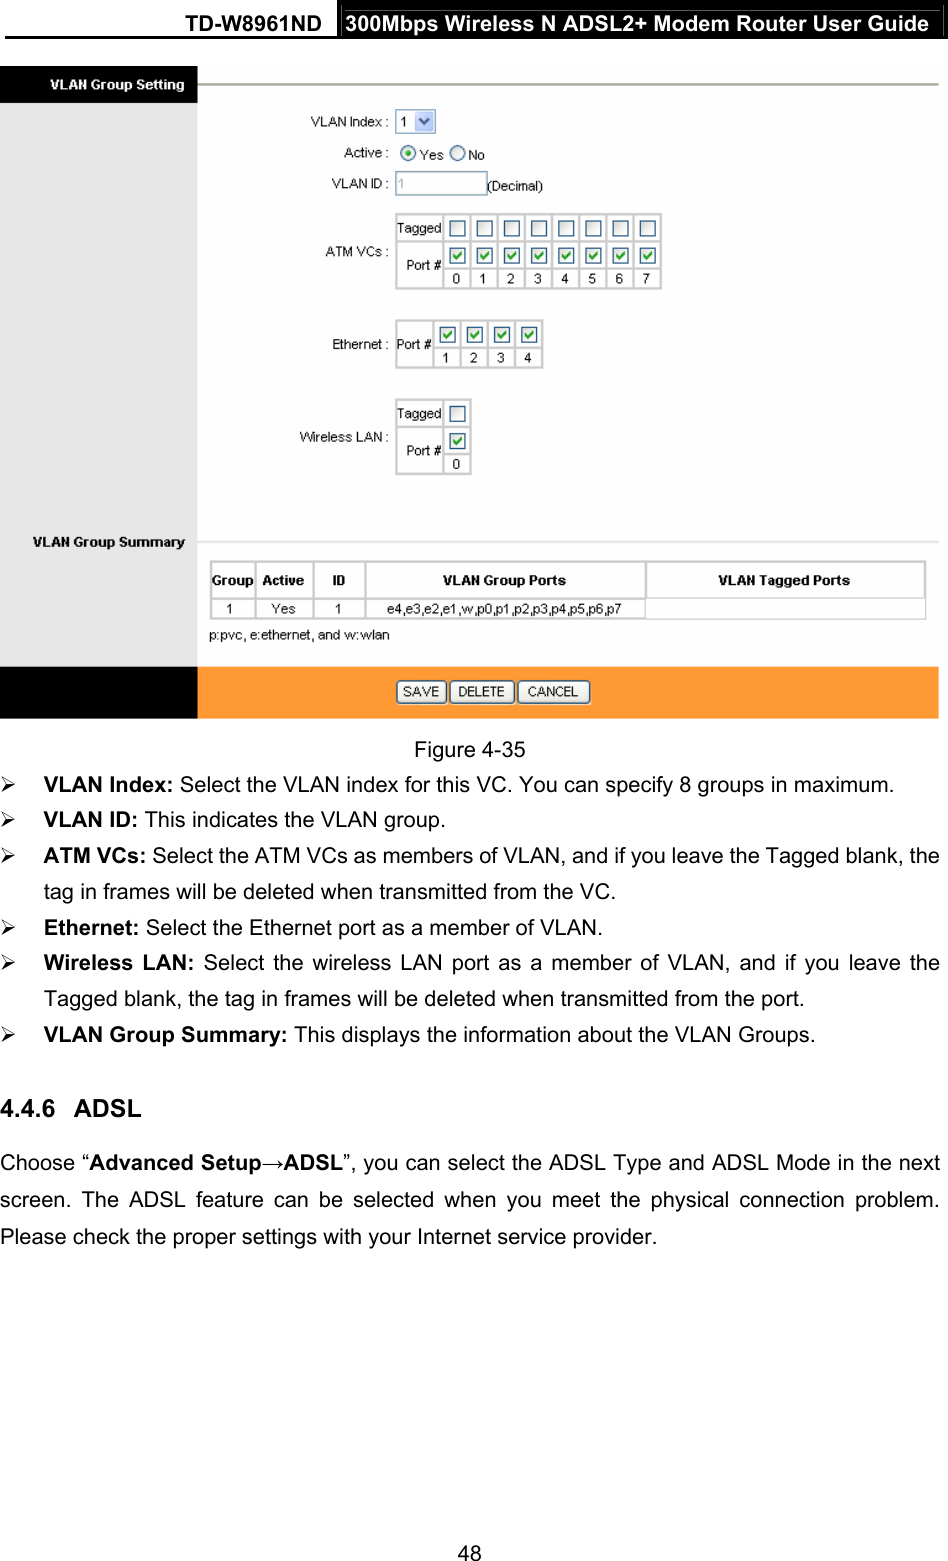 TD-W8961ND  300Mbps Wireless N ADSL2+ Modem Router User Guide  48 Figure 4-35 ¾ VLAN Index: Select the VLAN index for this VC. You can specify 8 groups in maximum. ¾ VLAN ID: This indicates the VLAN group. ¾ ATM VCs: Select the ATM VCs as members of VLAN, and if you leave the Tagged blank, the tag in frames will be deleted when transmitted from the VC. ¾ Ethernet: Select the Ethernet port as a member of VLAN. ¾ Wireless LAN: Select the wireless LAN port as a member of VLAN, and if you leave the Tagged blank, the tag in frames will be deleted when transmitted from the port. ¾ VLAN Group Summary: This displays the information about the VLAN Groups. 4.4.6  ADSL Choose “Advanced Setup→ADSL”, you can select the ADSL Type and ADSL Mode in the next screen. The ADSL feature can be selected when you meet the physical connection problem. Please check the proper settings with your Internet service provider. 